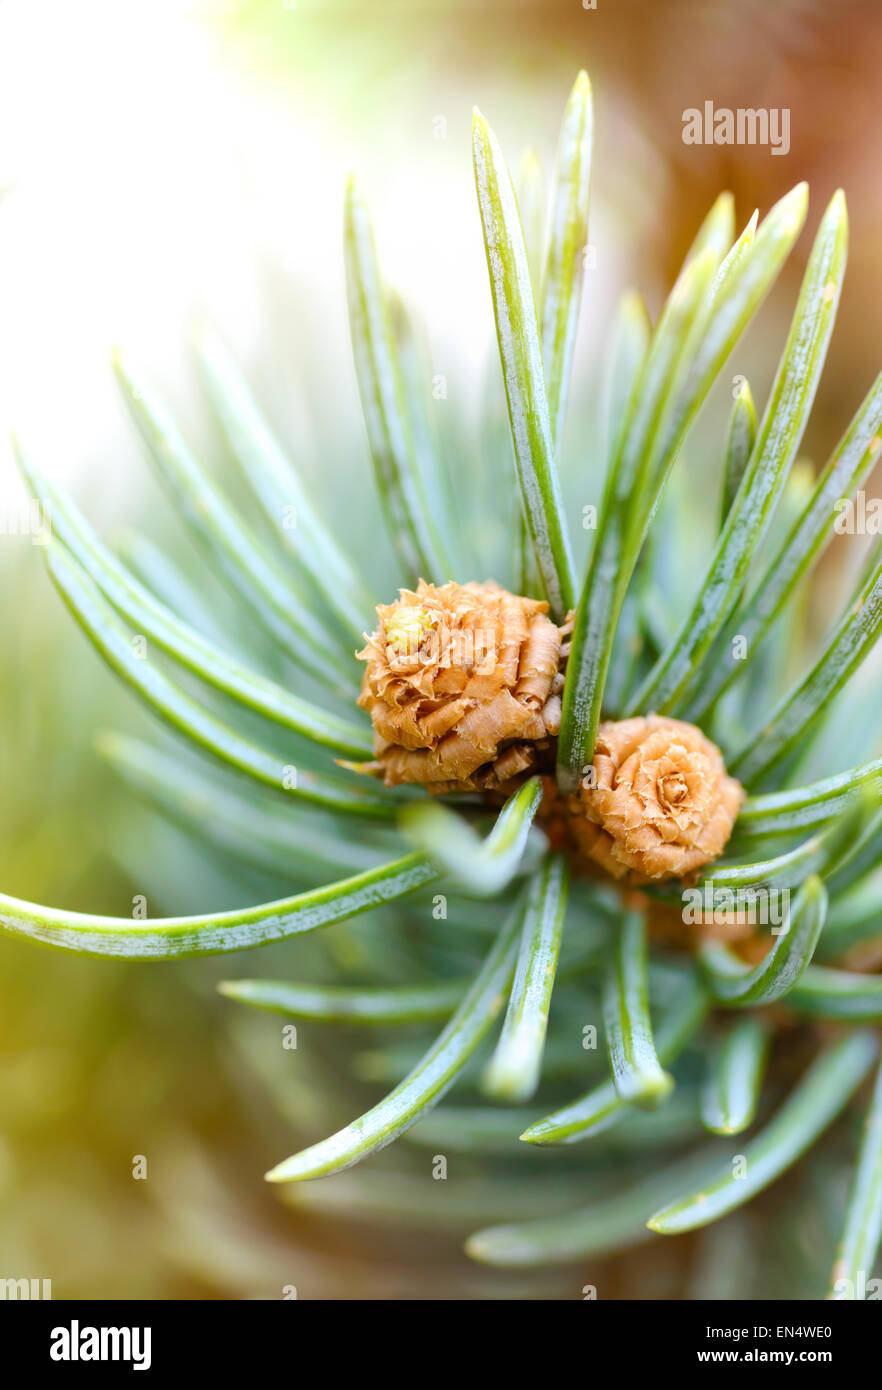 Plants and trees: fresh pine tree sprout, needles and small cones, in a sunlight, close-up shot, natural background Stock Photo